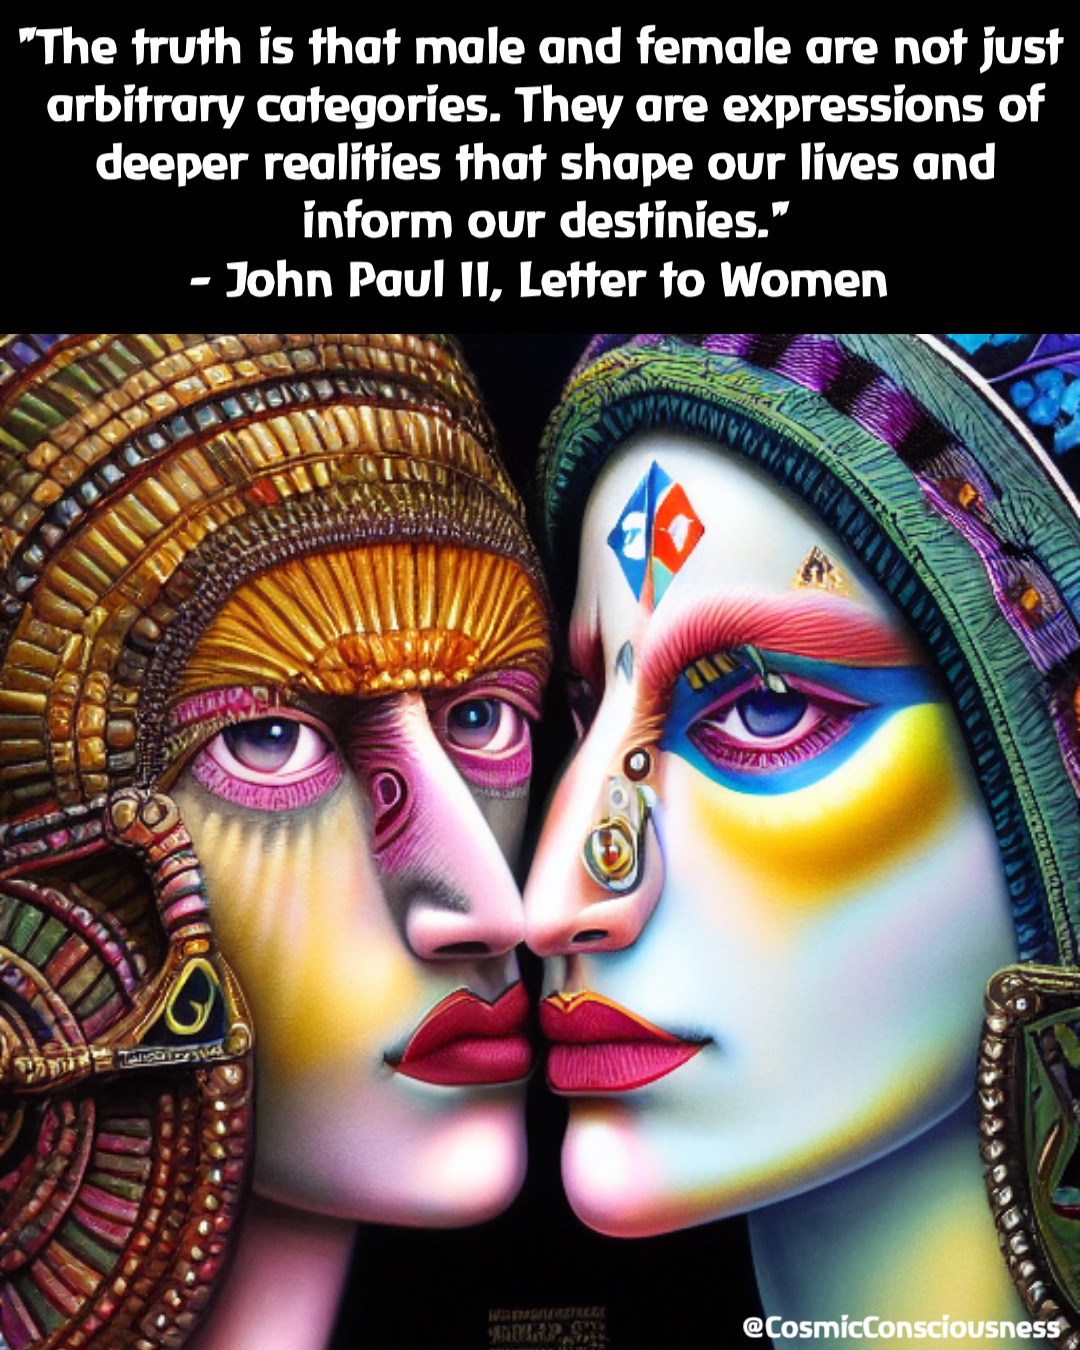 "The truth is that male and female are not just arbitrary categories. They are expressions of deeper realities that shape our lives and inform our destinies." 
- John Paul II, Letter to Women @CosmicConsciousness